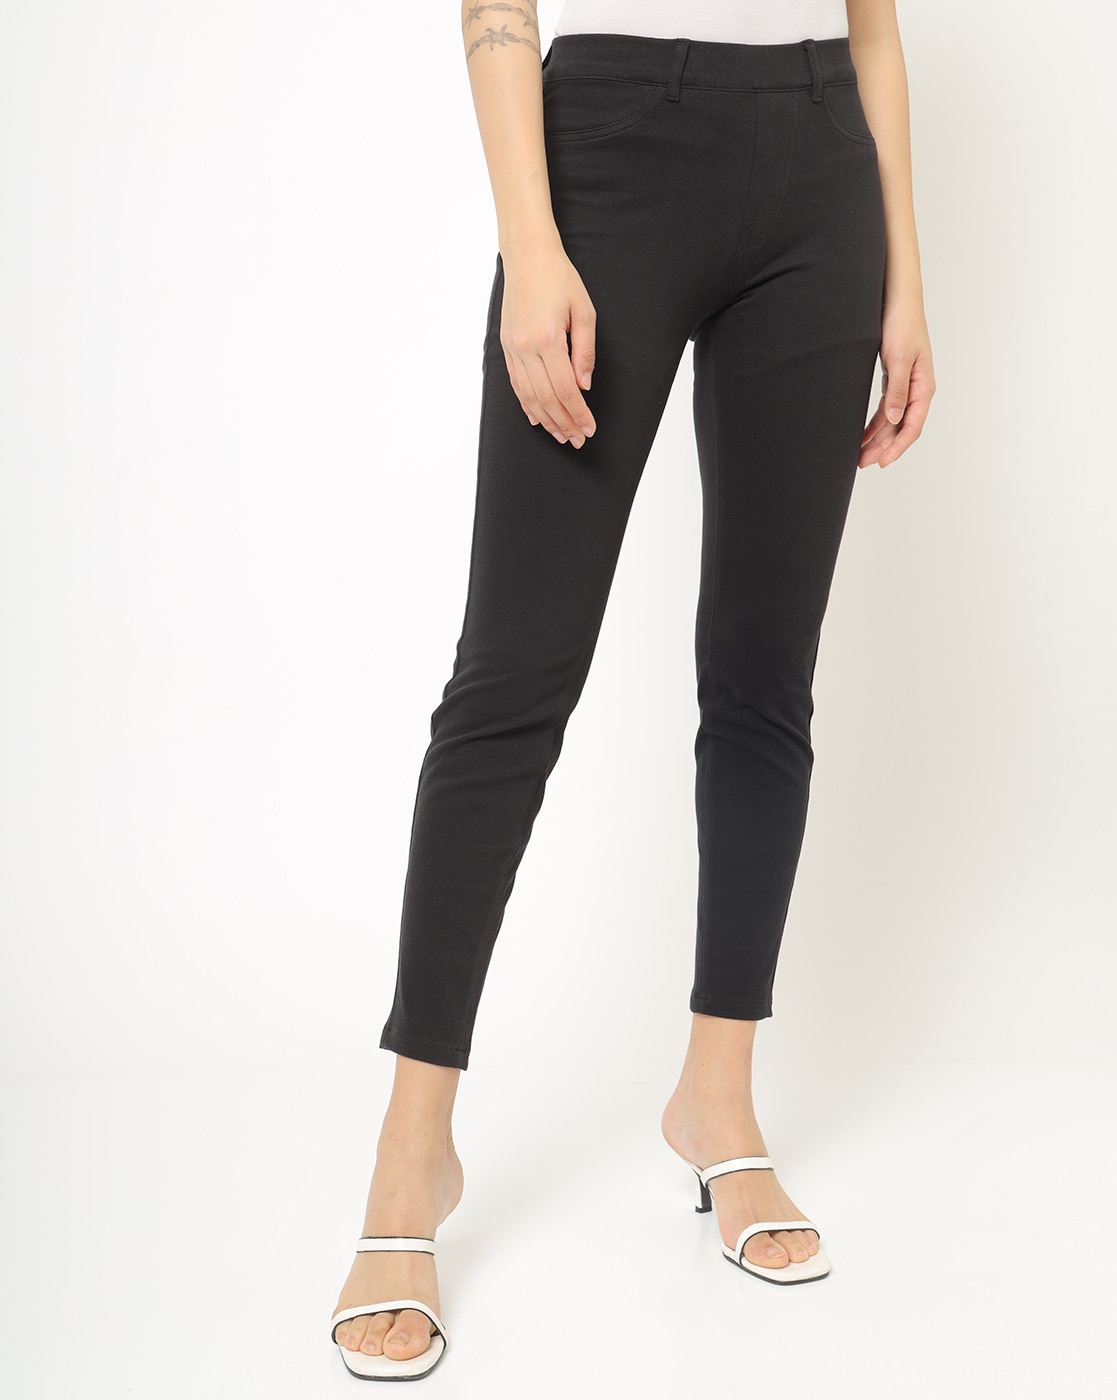 New Ladies Classic Flat Front Pants Online at Clothing Direct NZ